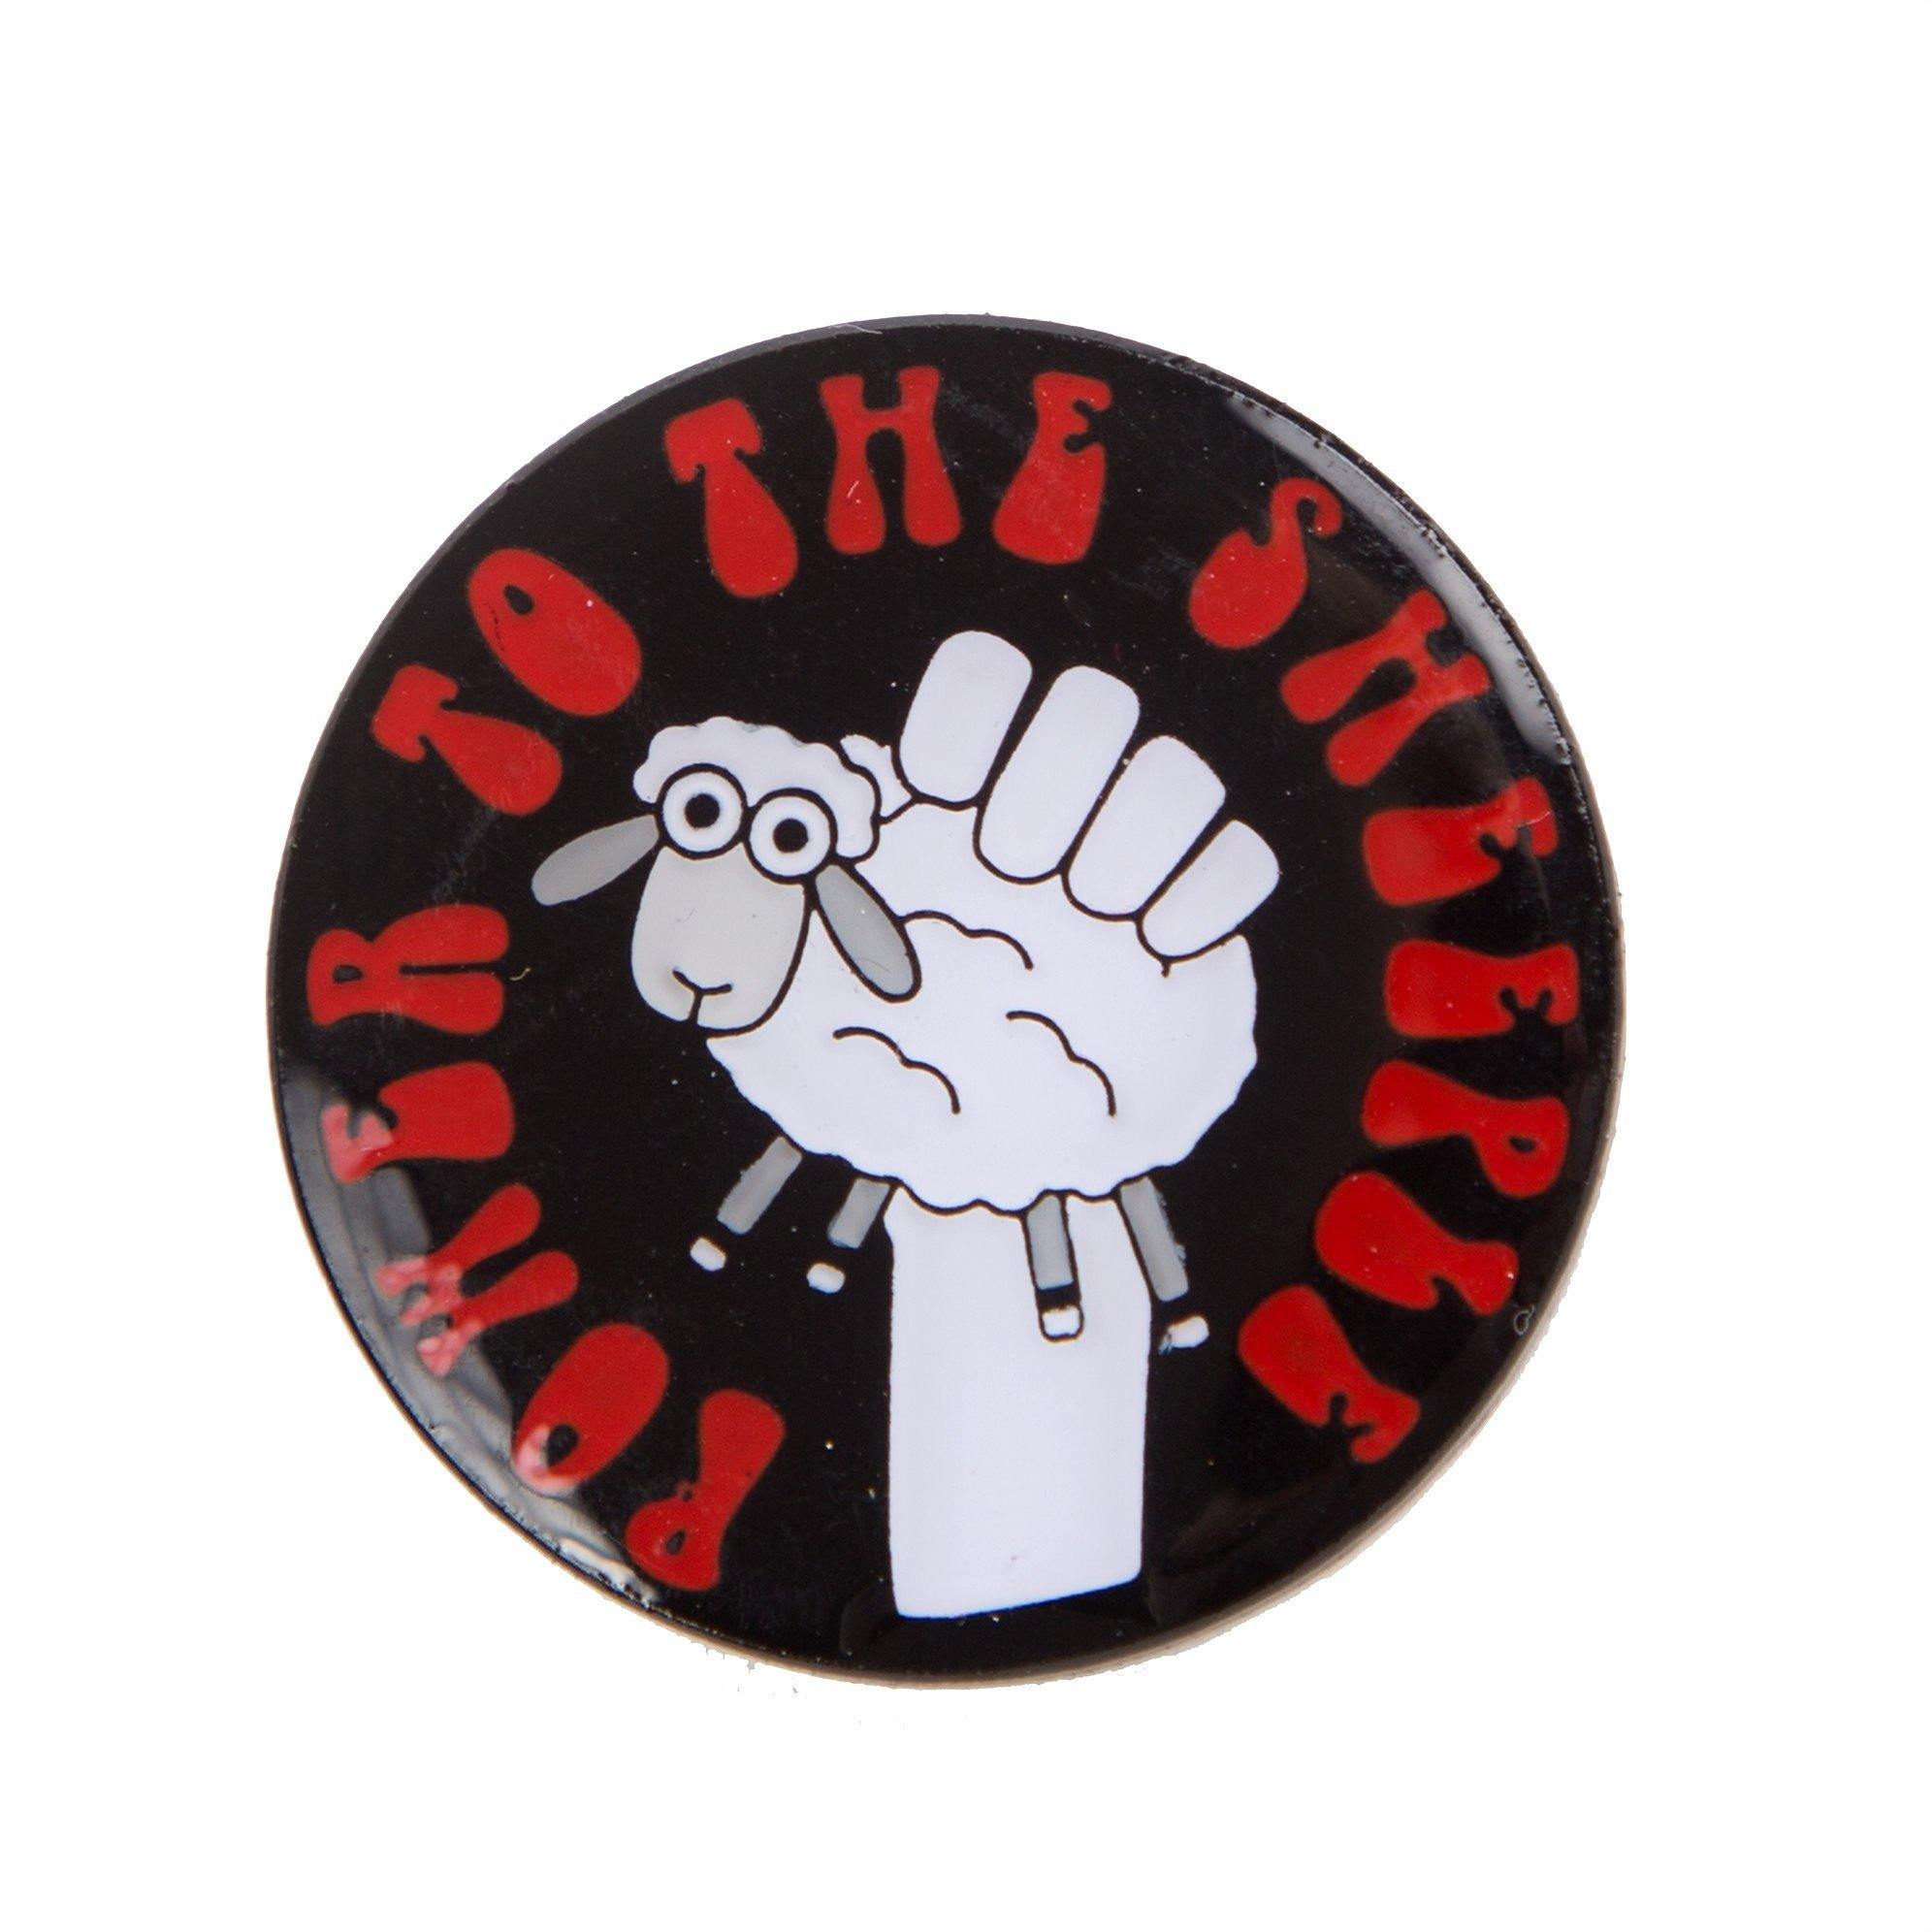 Power to the Sheeple Pin Badge